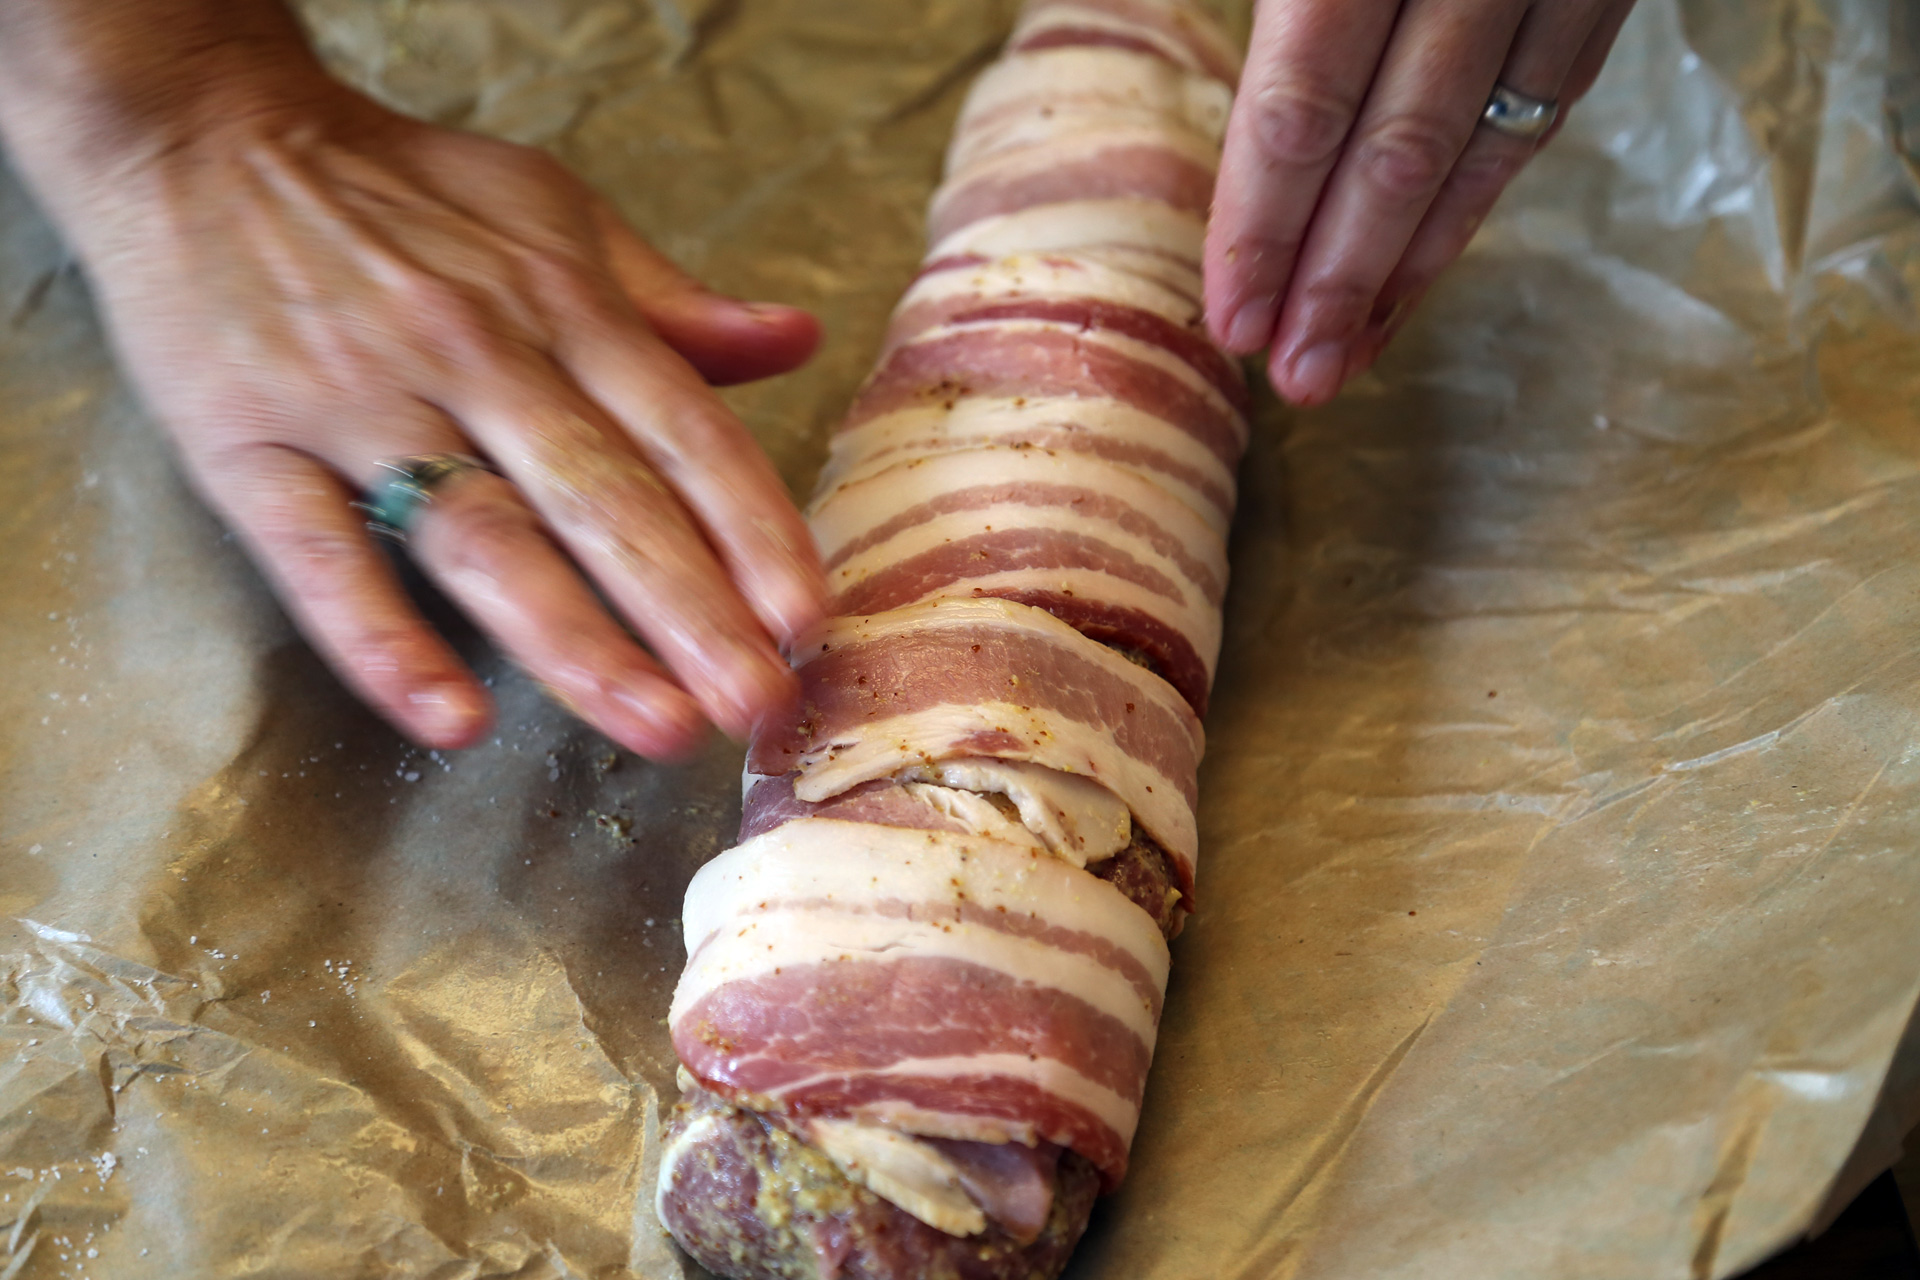 After bacon is wrapped, place on a plate, cover with plastic wrap, and refrigerate for 1 hour or up to overnight.